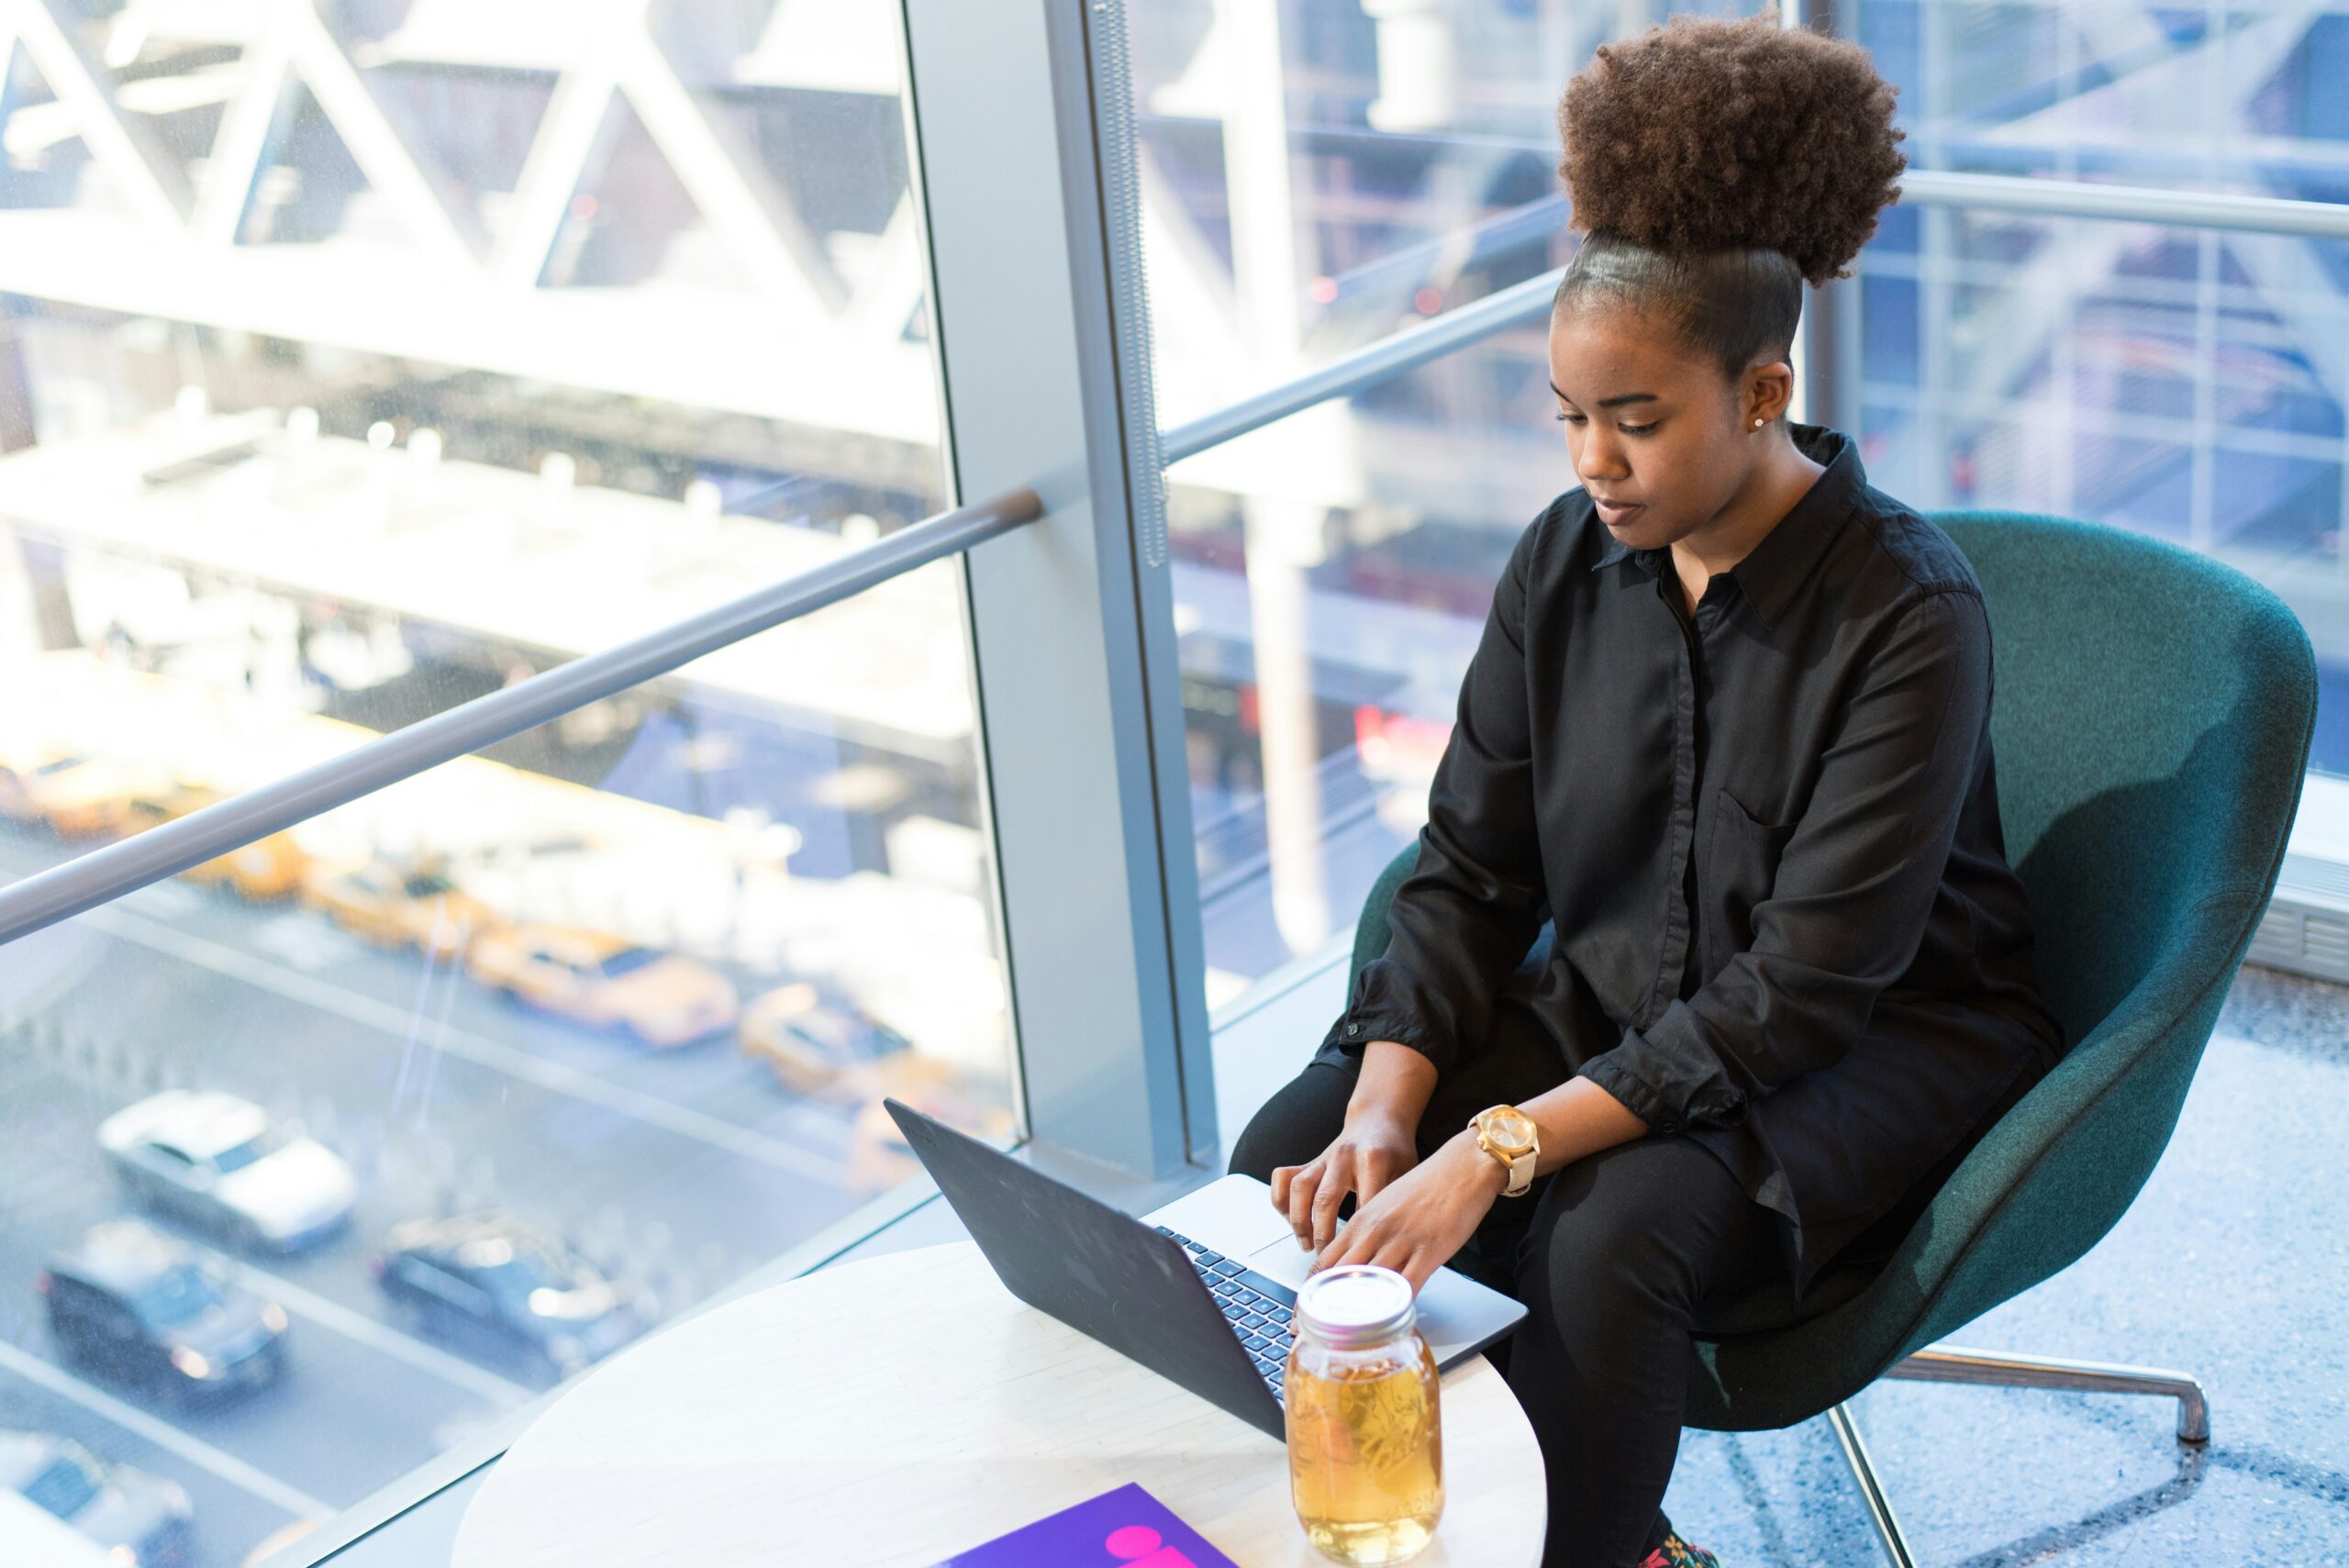 A woman of color sits on a chair with her laptop in front of her. She’s intently focused on the laptop. In the background, there is a big window showing a parking lot. Next to her, she has a glass of juice. This image accompanies a blog about reflecting on the past semester to improve leadership skills in women of color in higher education.